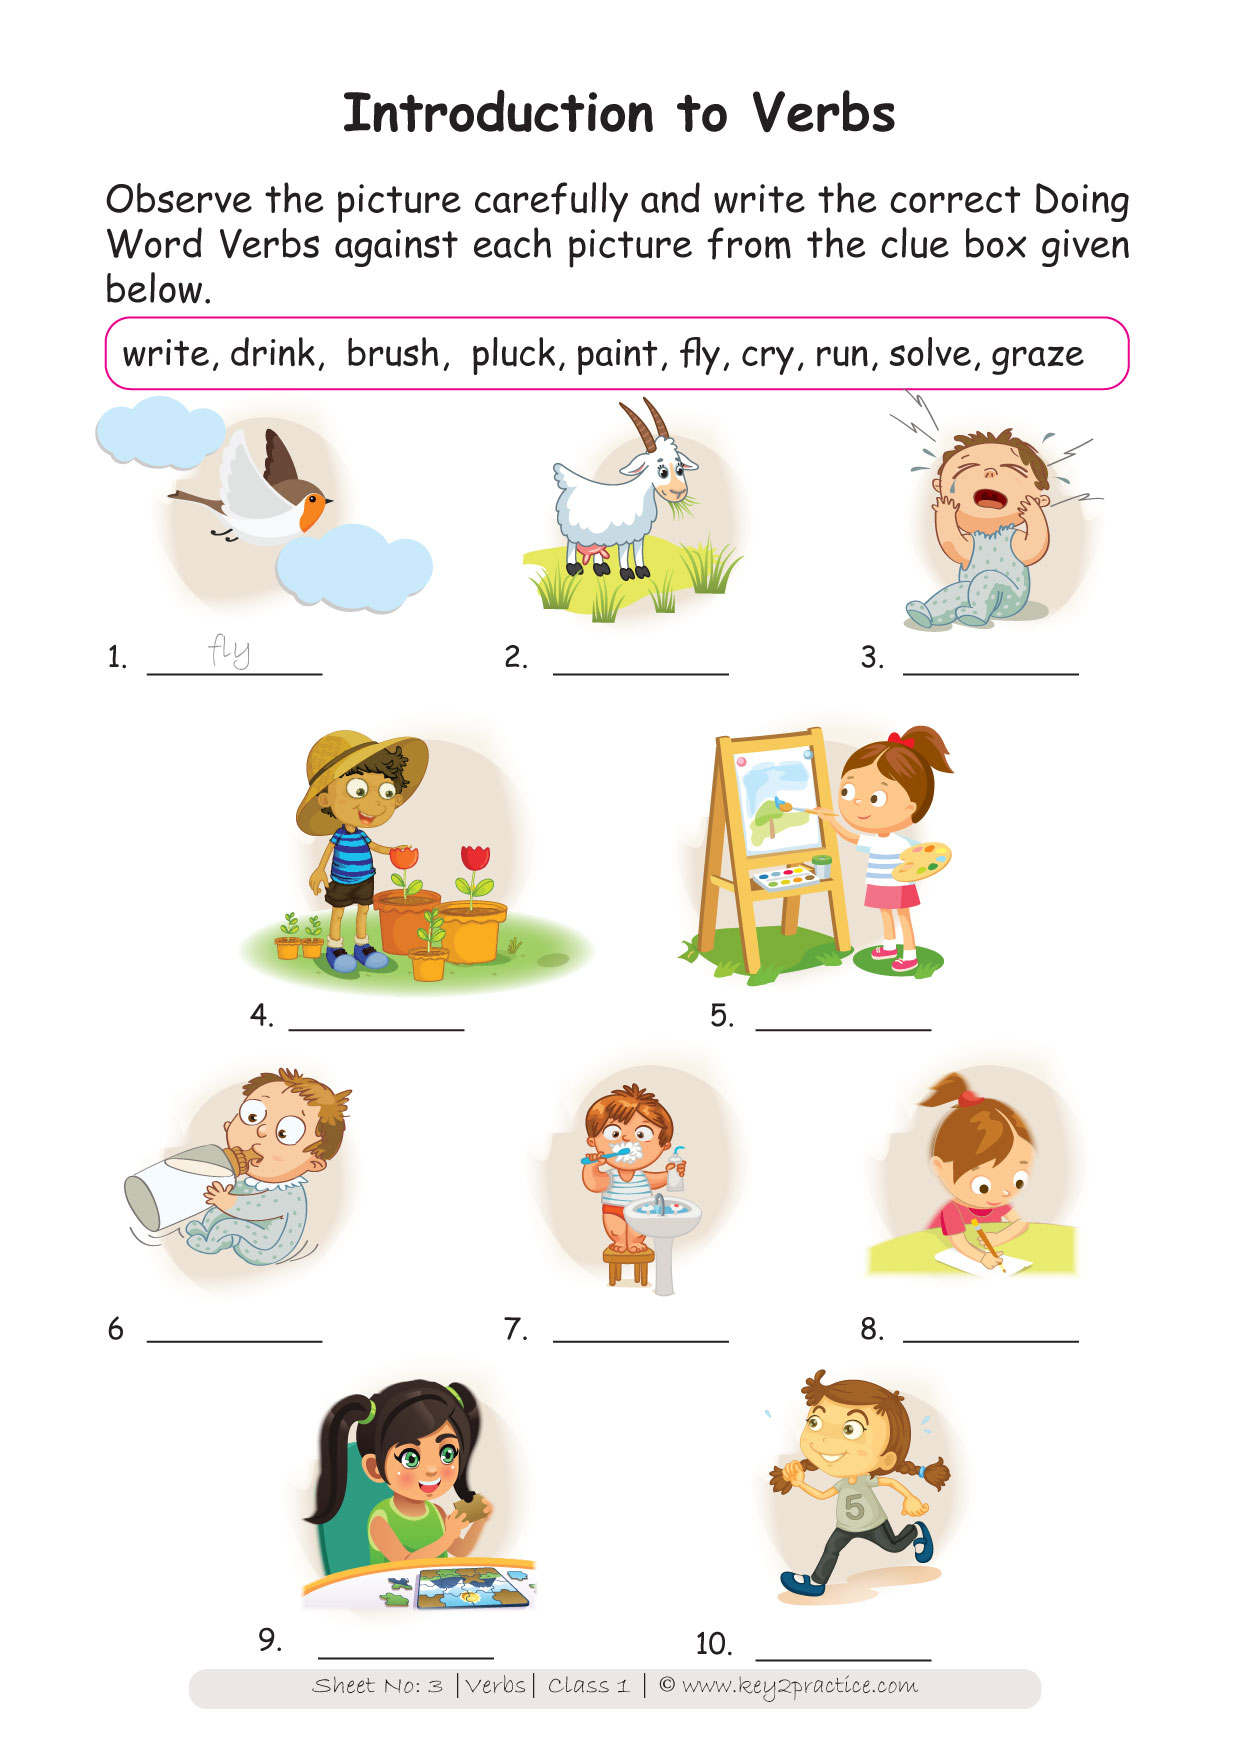 verb-to-be-worksheets-for-grade-2-your-home-teacher-printable-verb-worksheets-from